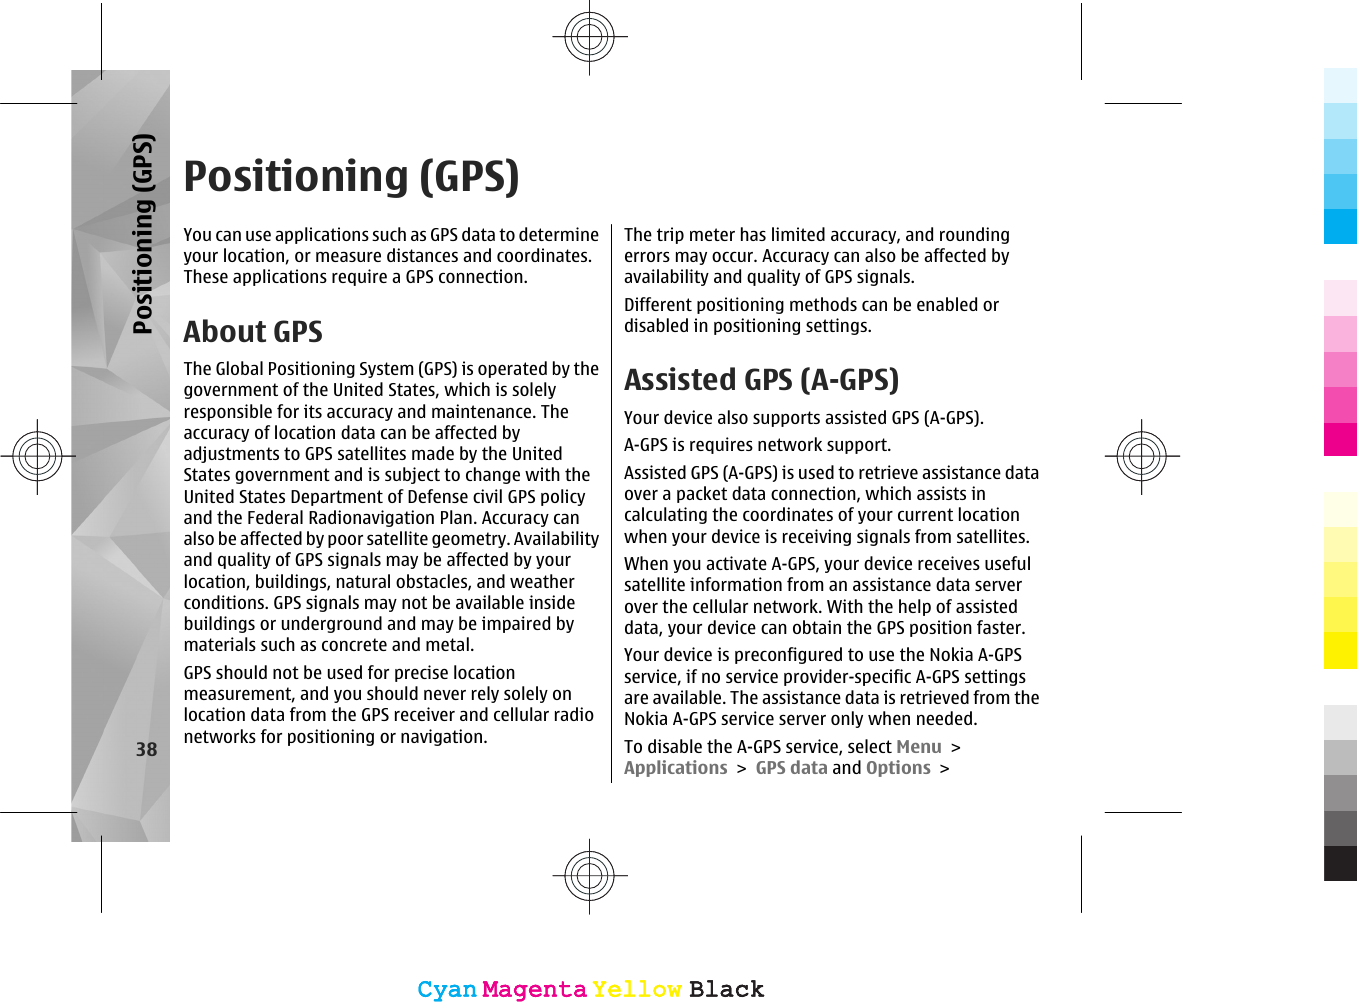 Positioning (GPS)You can use applications such as GPS data to determineyour location, or measure distances and coordinates.These applications require a GPS connection.About GPSThe Global Positioning System (GPS) is operated by thegovernment of the United States, which is solelyresponsible for its accuracy and maintenance. Theaccuracy of location data can be affected byadjustments to GPS satellites made by the UnitedStates government and is subject to change with theUnited States Department of Defense civil GPS policyand the Federal Radionavigation Plan. Accuracy canalso be affected by poor satellite geometry. Availabilityand quality of GPS signals may be affected by yourlocation, buildings, natural obstacles, and weatherconditions. GPS signals may not be available insidebuildings or underground and may be impaired bymaterials such as concrete and metal.GPS should not be used for precise locationmeasurement, and you should never rely solely onlocation data from the GPS receiver and cellular radionetworks for positioning or navigation.The trip meter has limited accuracy, and roundingerrors may occur. Accuracy can also be affected byavailability and quality of GPS signals.Different positioning methods can be enabled ordisabled in positioning settings.Assisted GPS (A-GPS)Your device also supports assisted GPS (A-GPS).A-GPS is requires network support.Assisted GPS (A-GPS) is used to retrieve assistance dataover a packet data connection, which assists incalculating the coordinates of your current locationwhen your device is receiving signals from satellites.When you activate A-GPS, your device receives usefulsatellite information from an assistance data serverover the cellular network. With the help of assisteddata, your device can obtain the GPS position faster.Your device is preconfigured to use the Nokia A-GPSservice, if no service provider-specific A-GPS settingsare available. The assistance data is retrieved from theNokia A-GPS service server only when needed.To disable the A-GPS service, select Menu &gt;Applications &gt; GPS data and Options &gt;38Positioning (GPS)CyanCyanMagentaMagentaYellowYellowBlackBlackCyanCyanMagentaMagentaYellowYellowBlackBlack